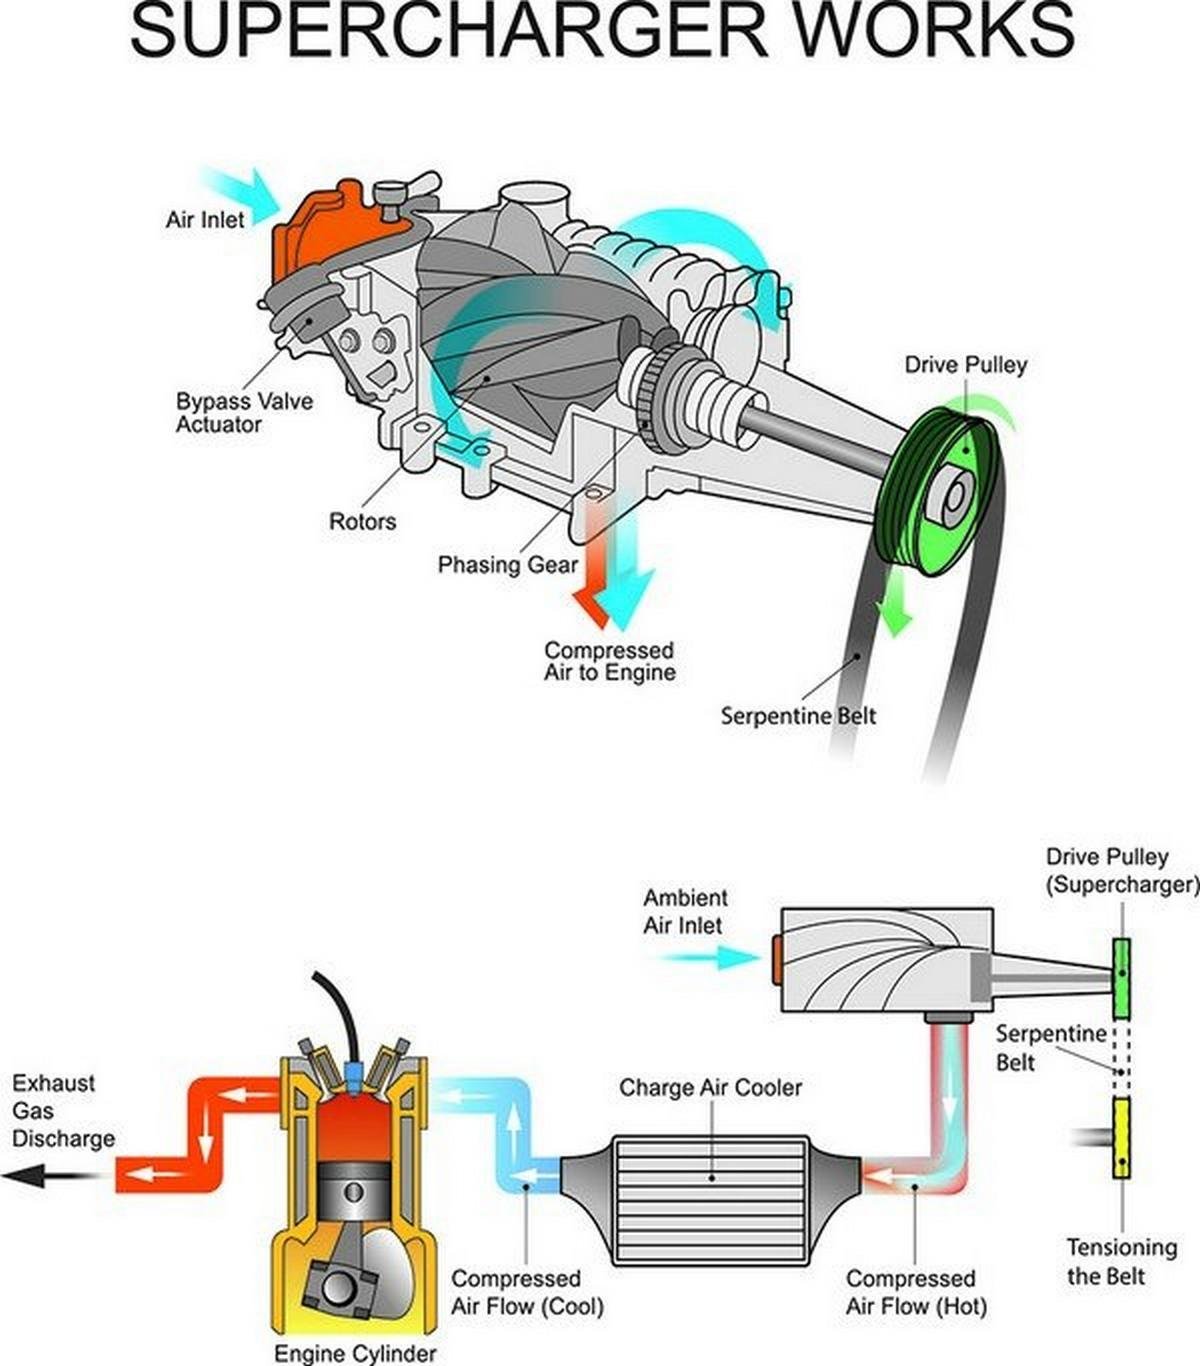 Diagram showing the operation of a supercharger